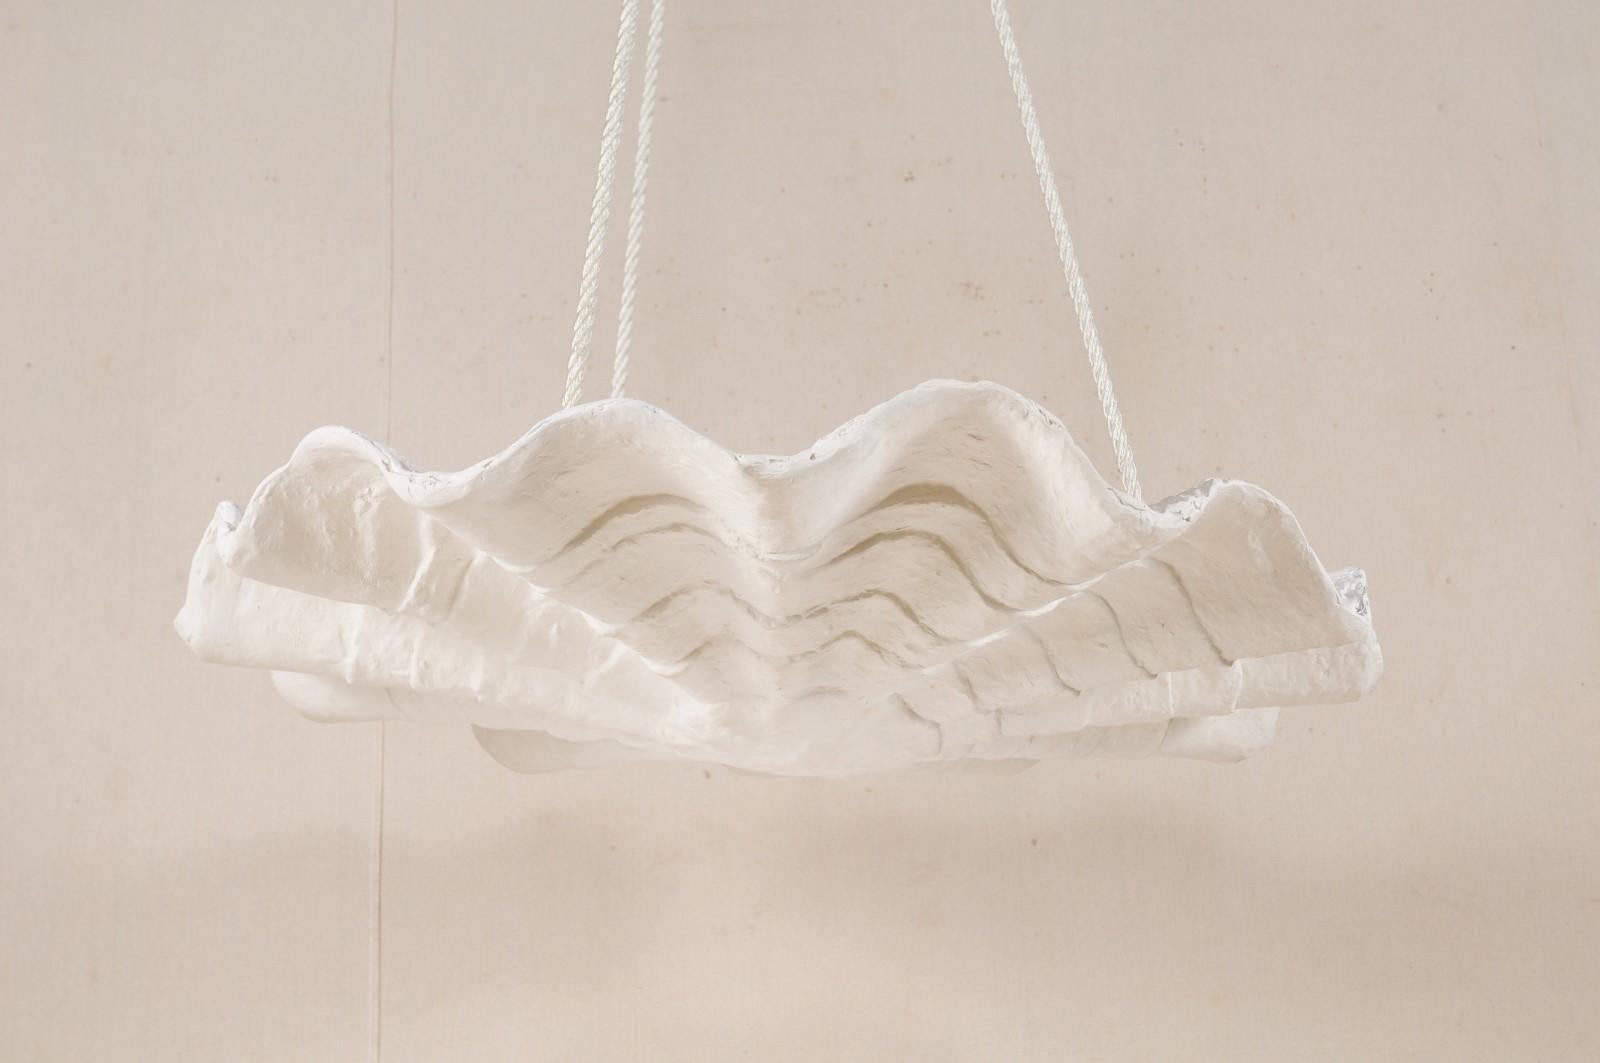 This artisan-made hanging modern light fixture, inspired by midcentury designs, has an overall convex and rounded shape, with undulating waves and concentric ring textures adorning it's downward-facing facade. This handcrafted plaster light fixture,